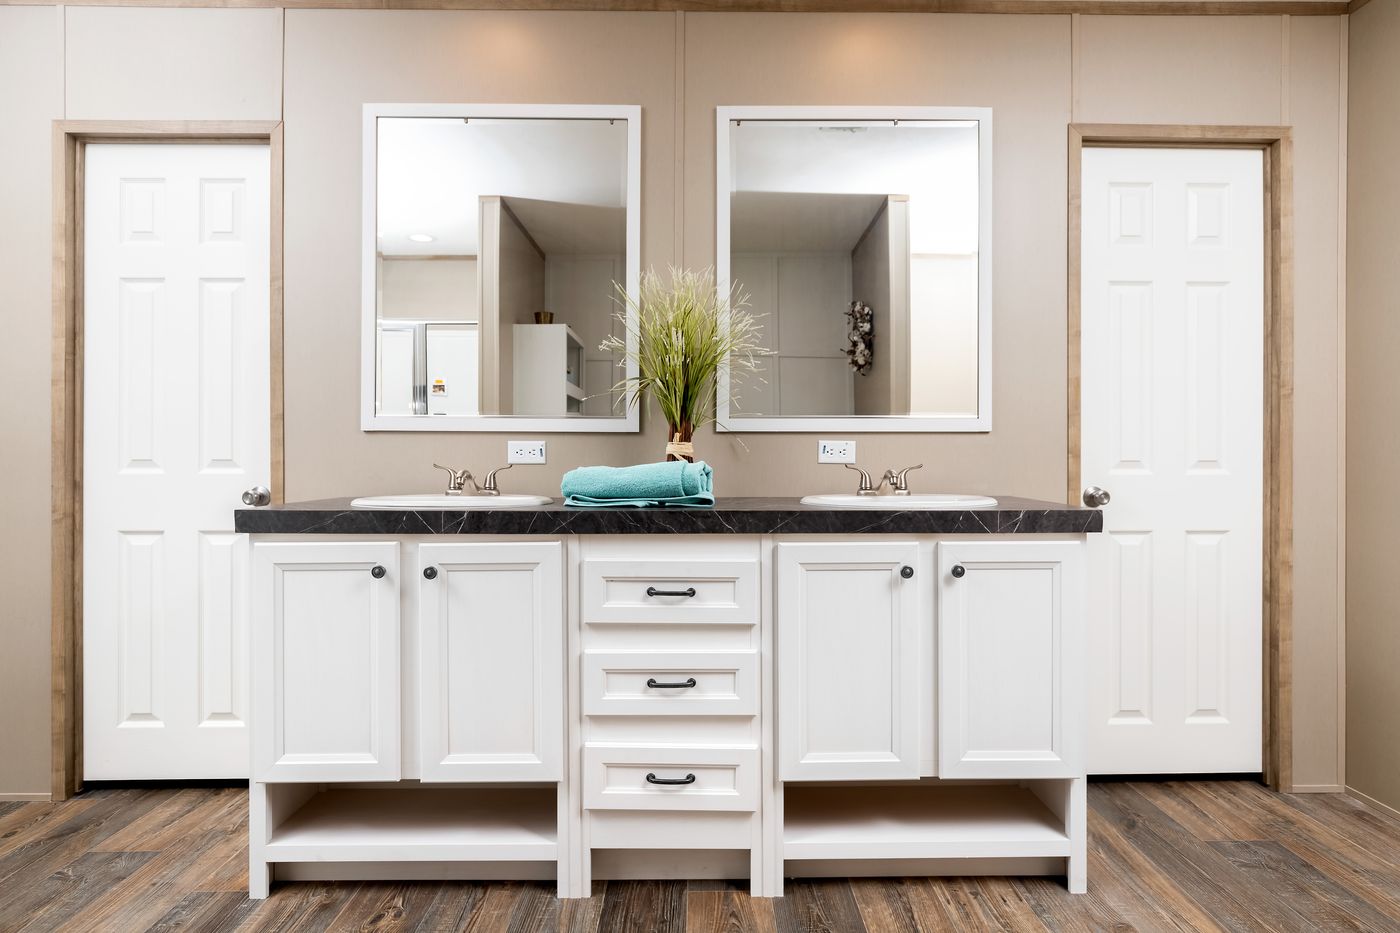 The FARMHOUSE FLEX Primary Bathroom. This Manufactured Mobile Home features 3 bedrooms and 2.5 baths.